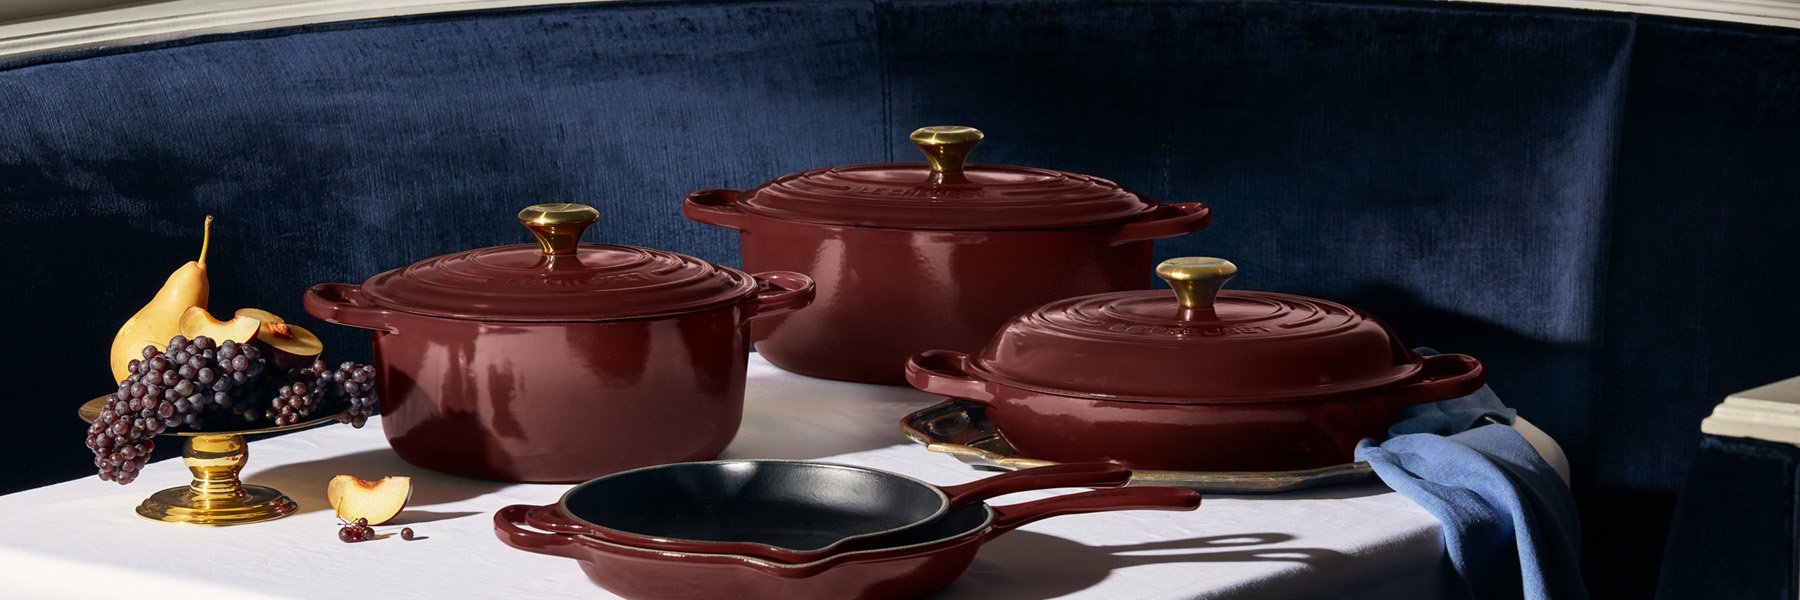 Photo of Le Creuset Rhone tablesetting.